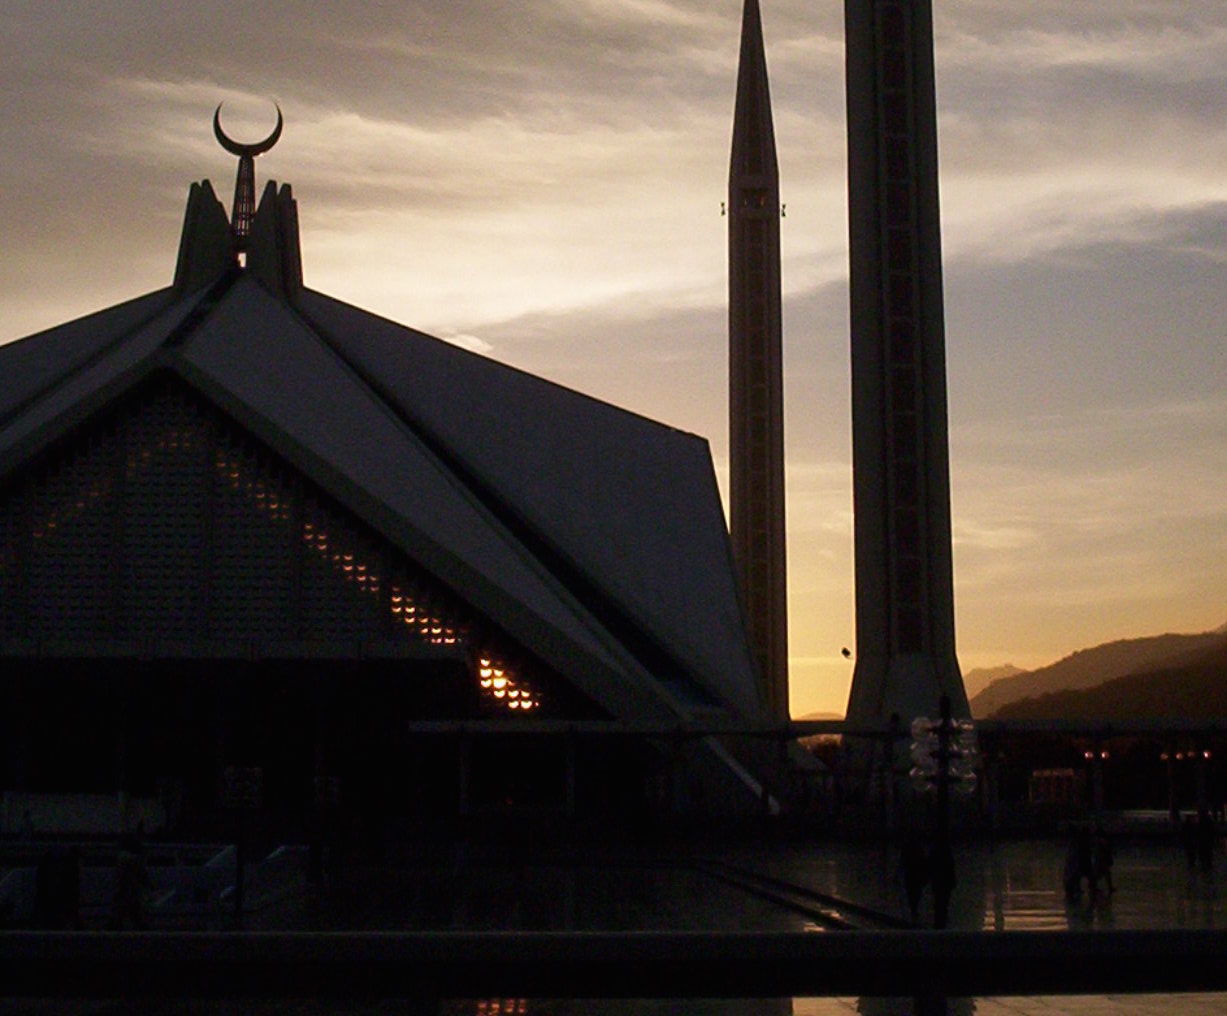 With Diary of a Serial Expat: Being Muslim in Pakistan